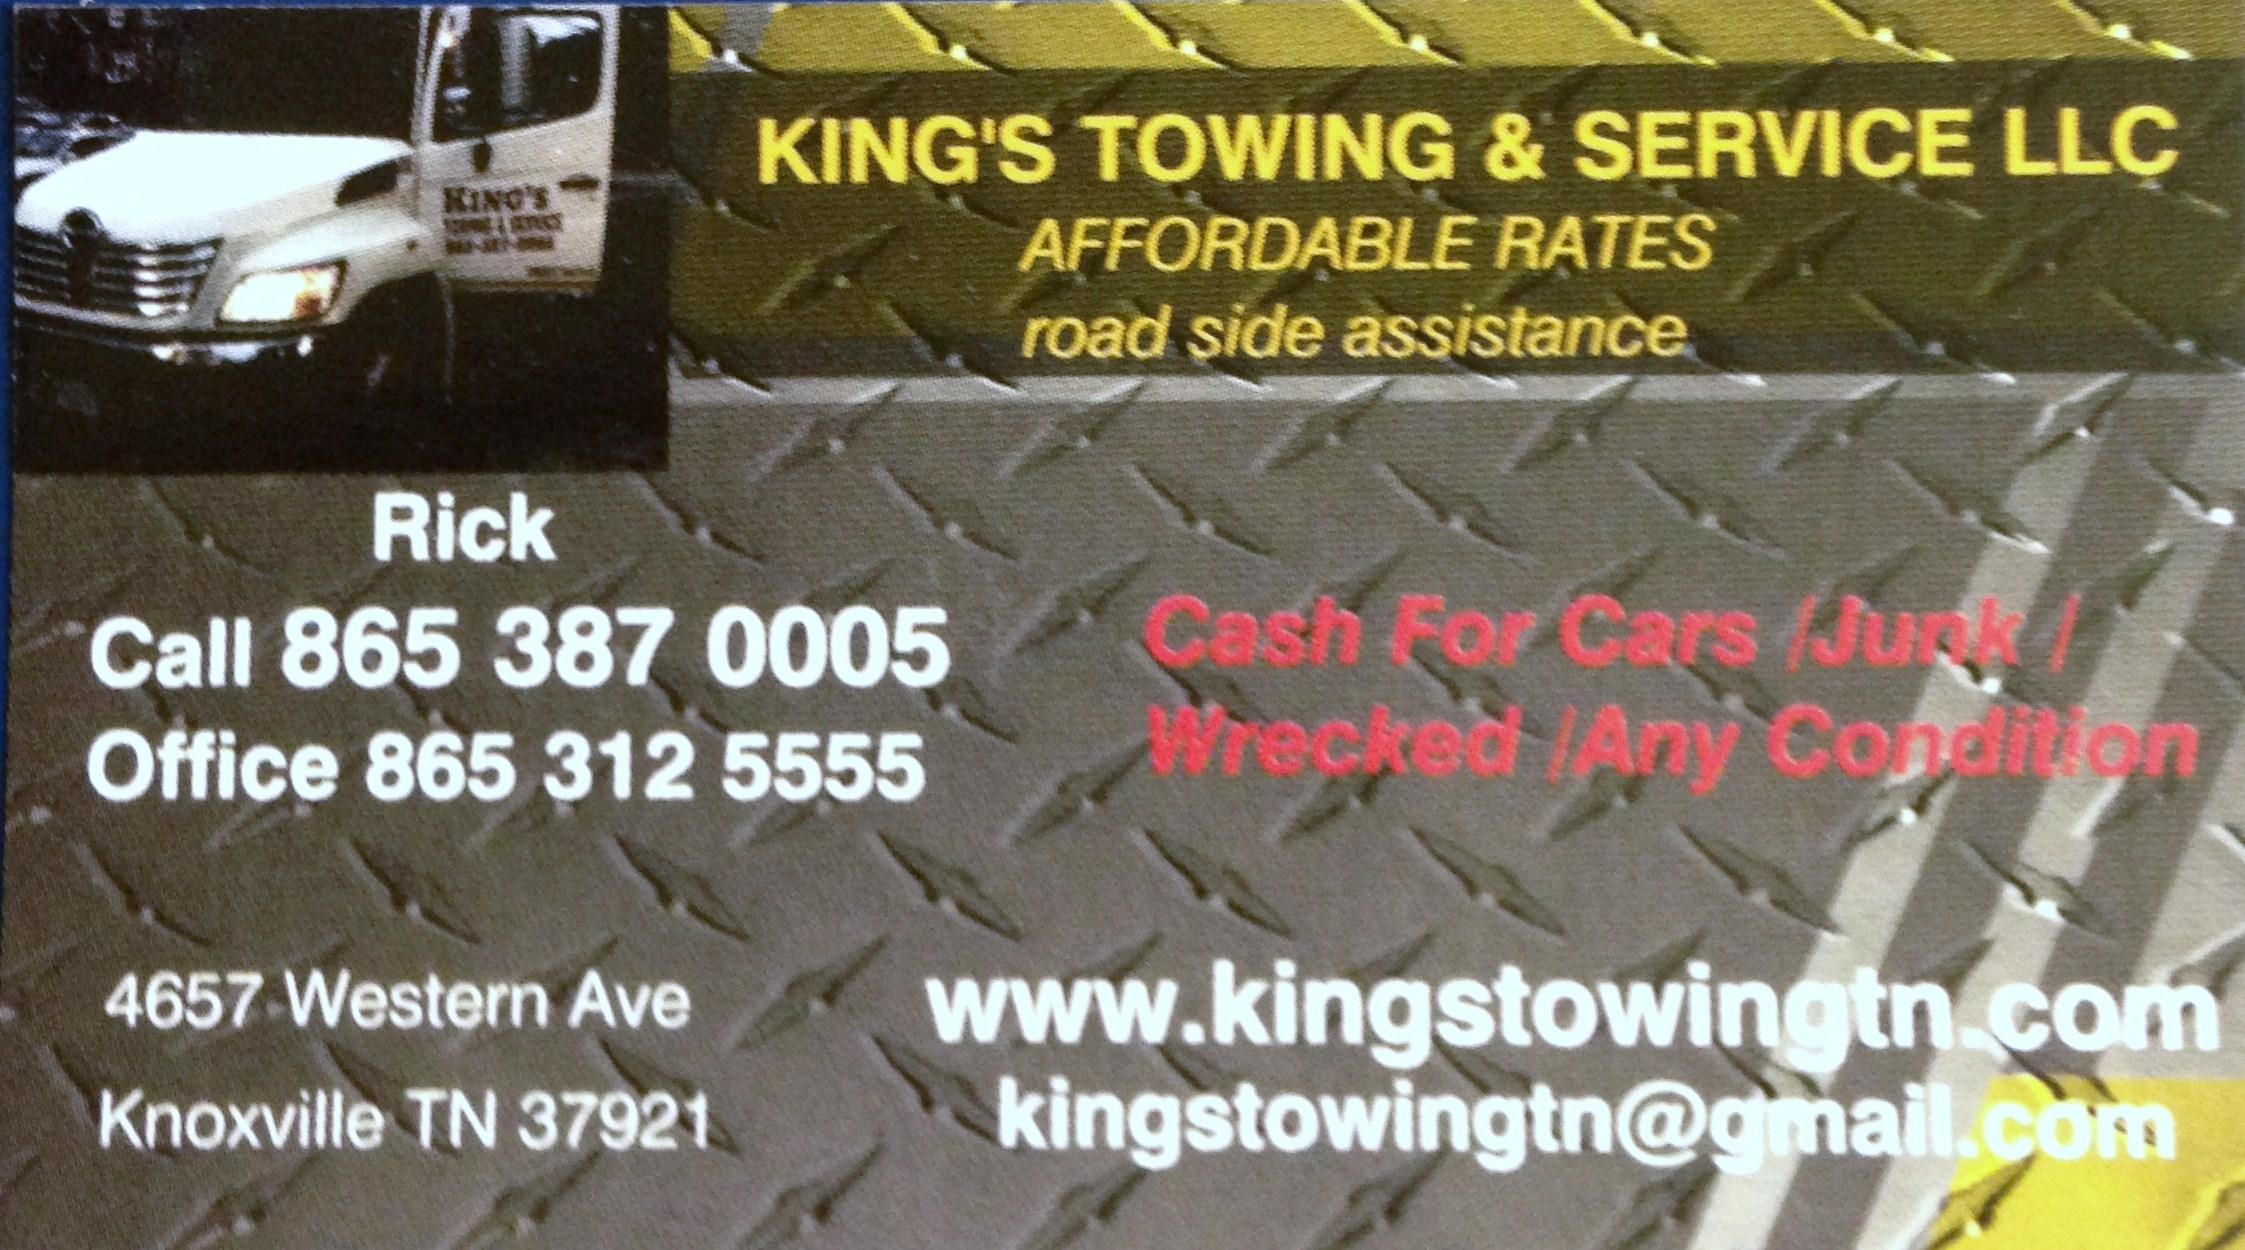 Kings Towing and Service